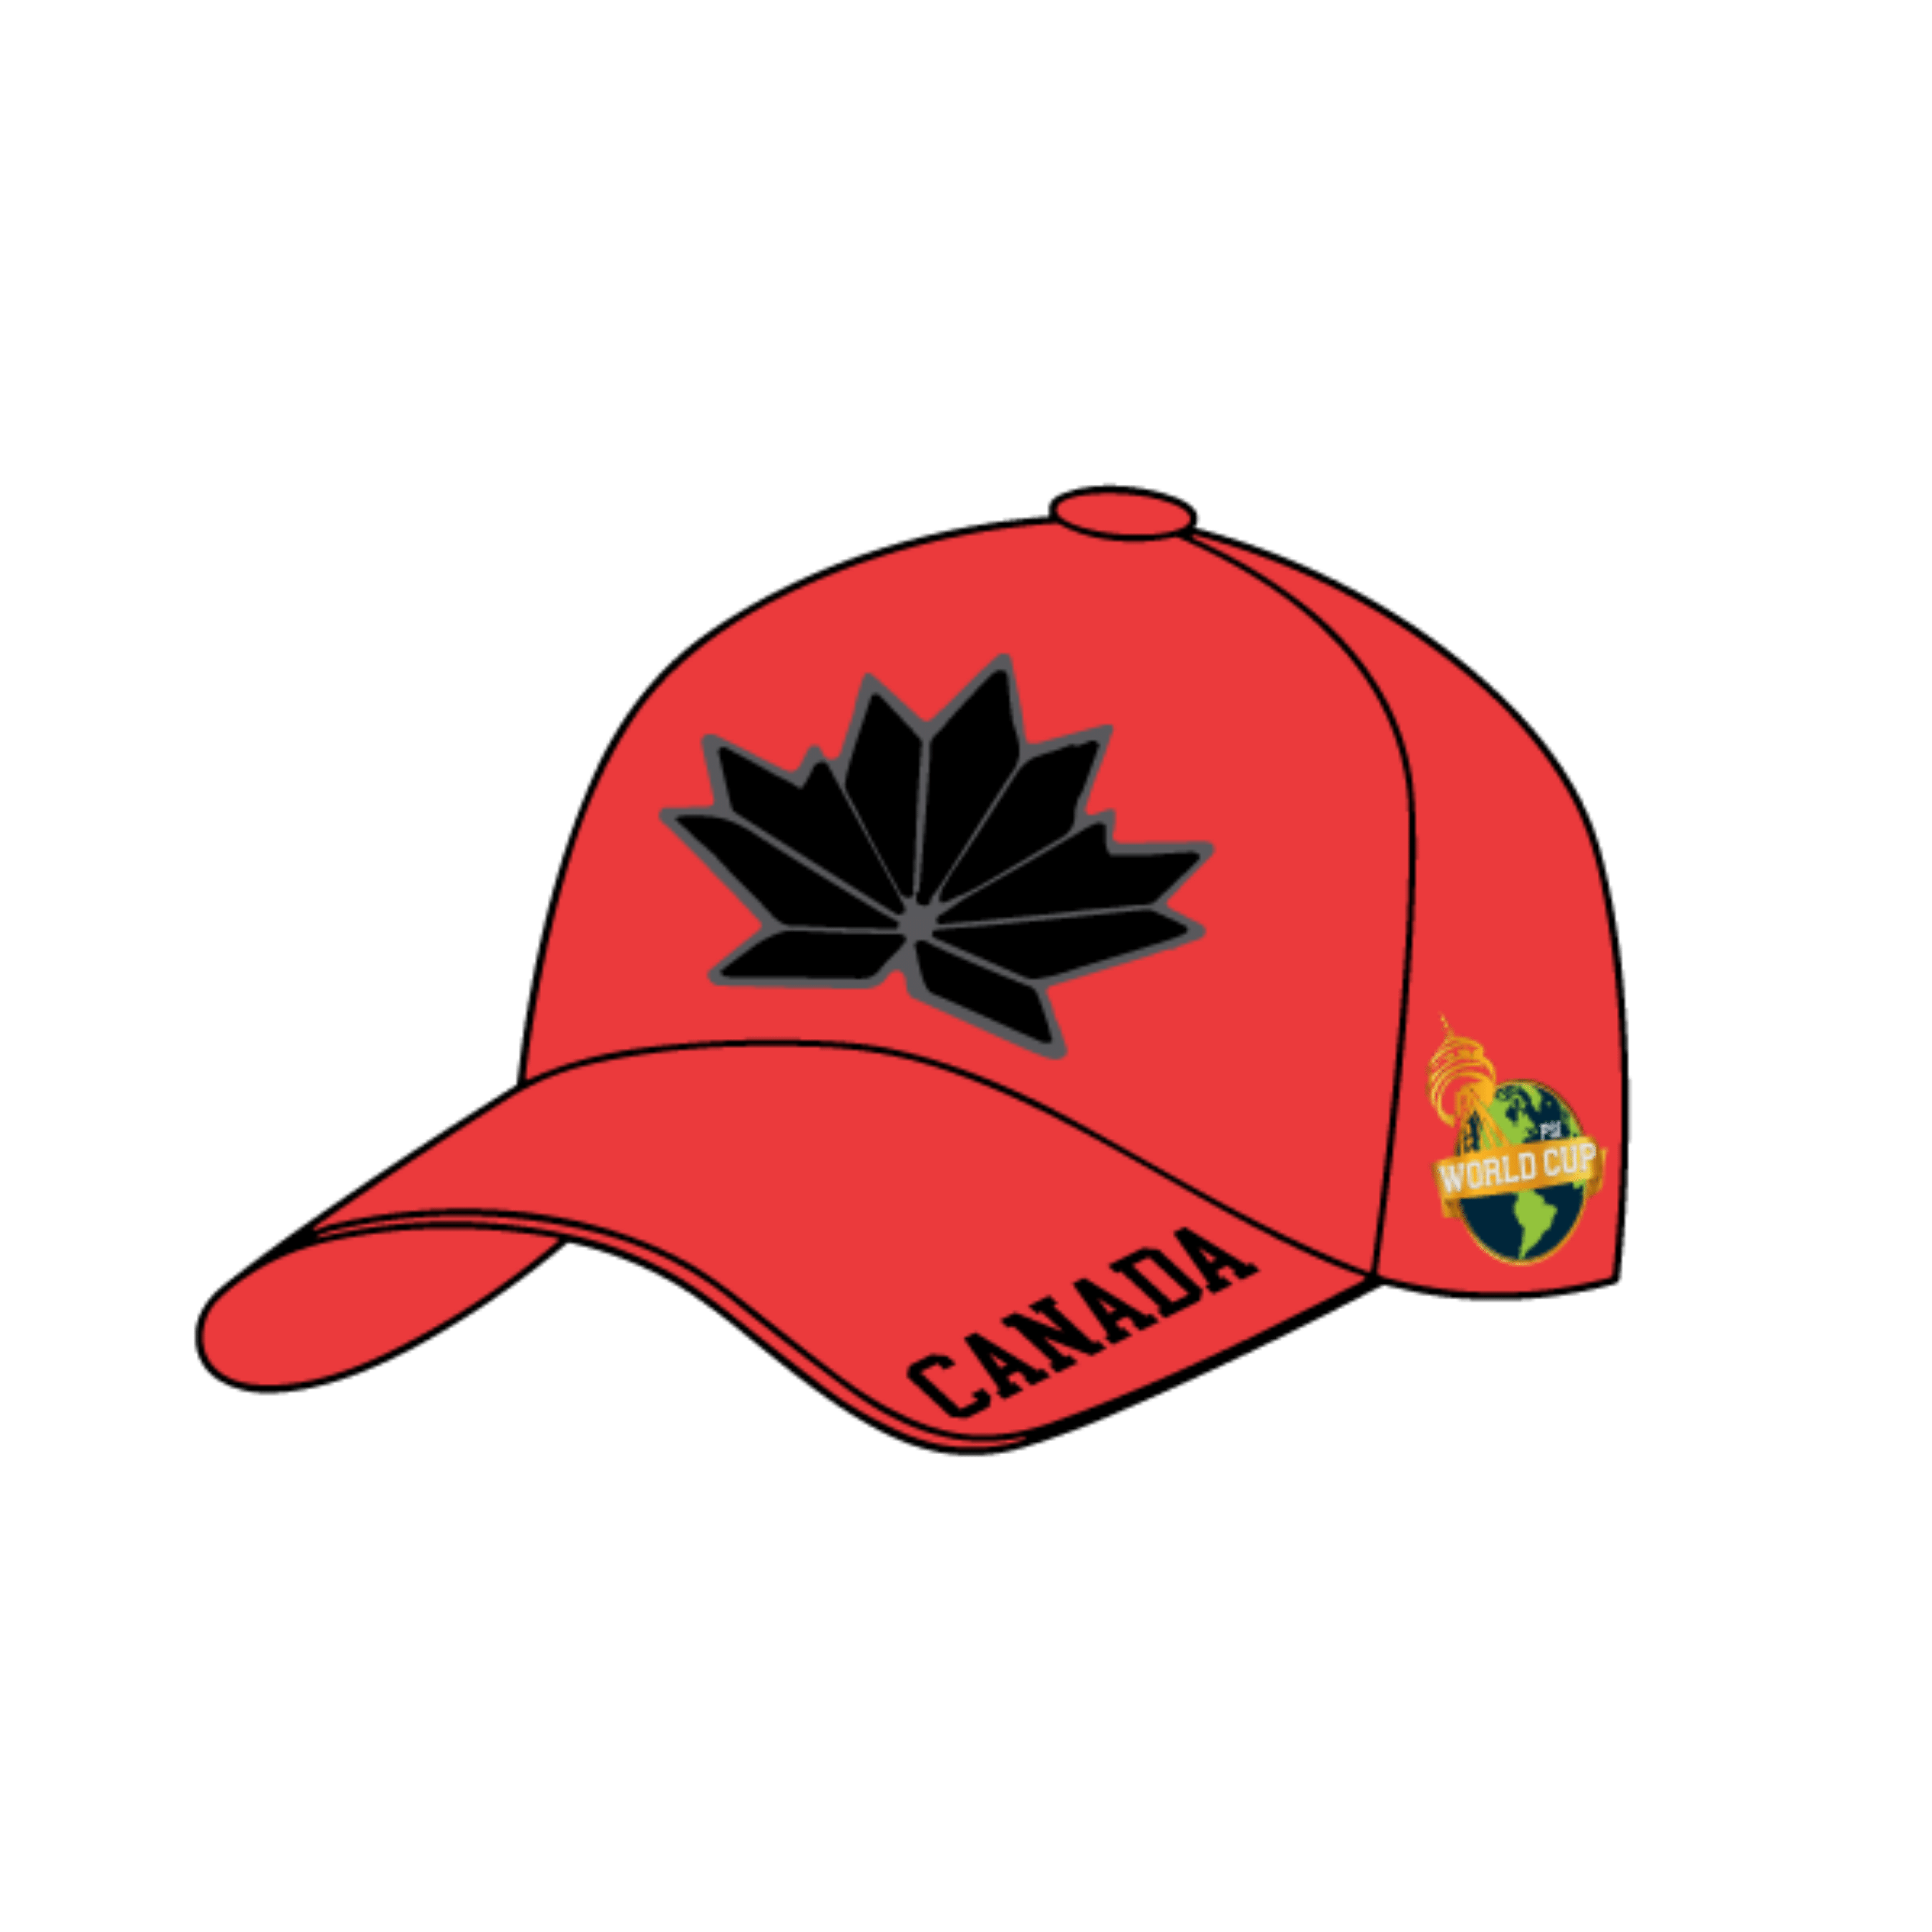 Canada Red World Cup Team Bundle